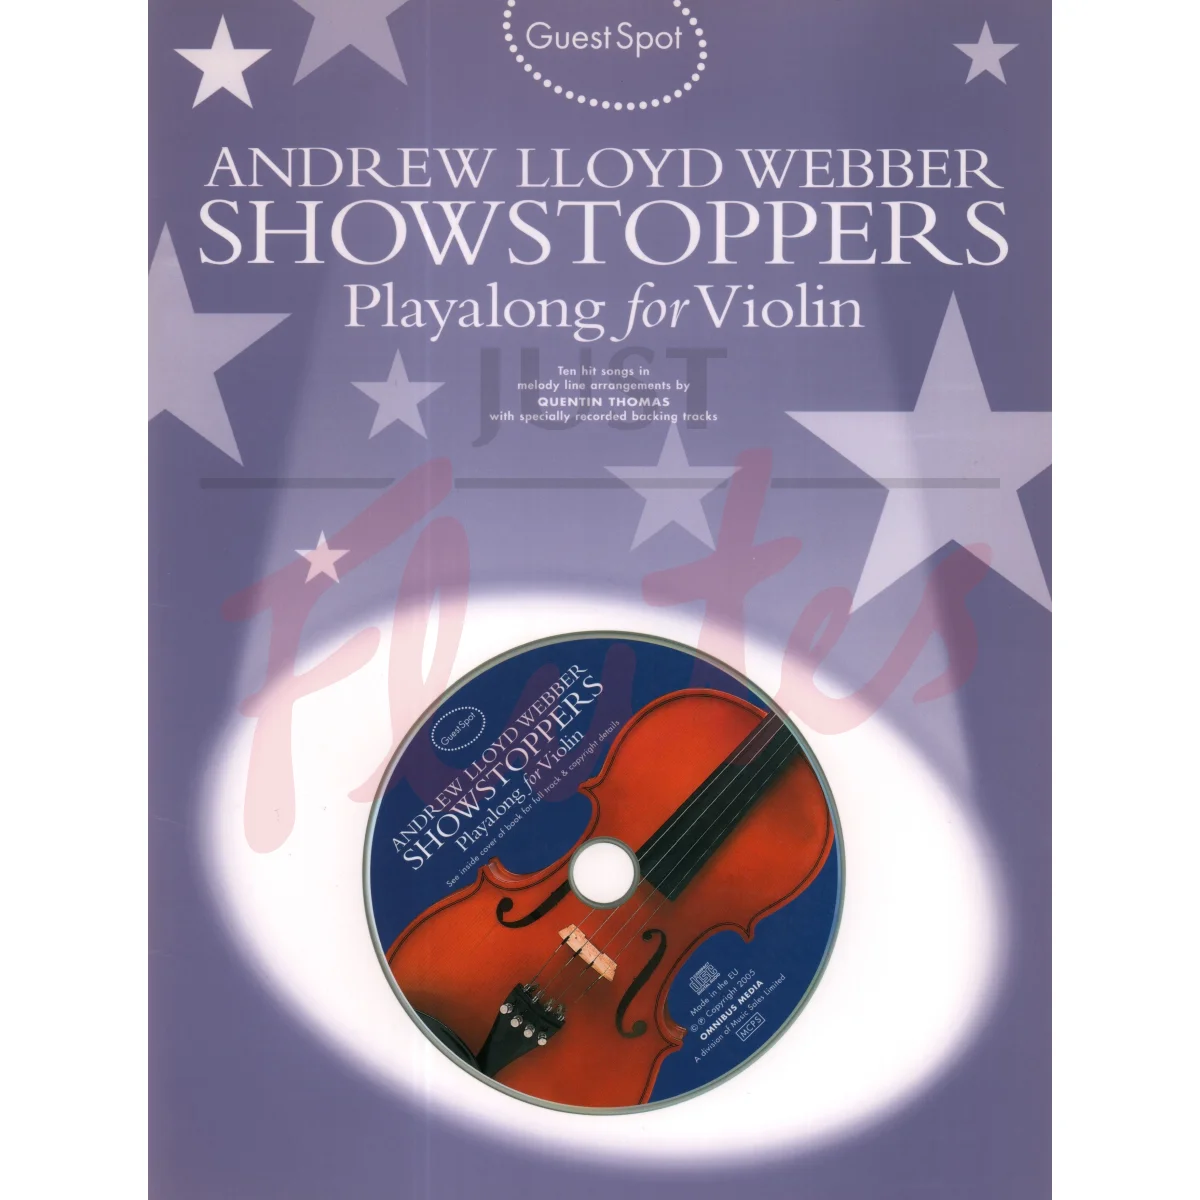 Guest Spot - Andrew Lloyd Webber Showstoppers for Violin